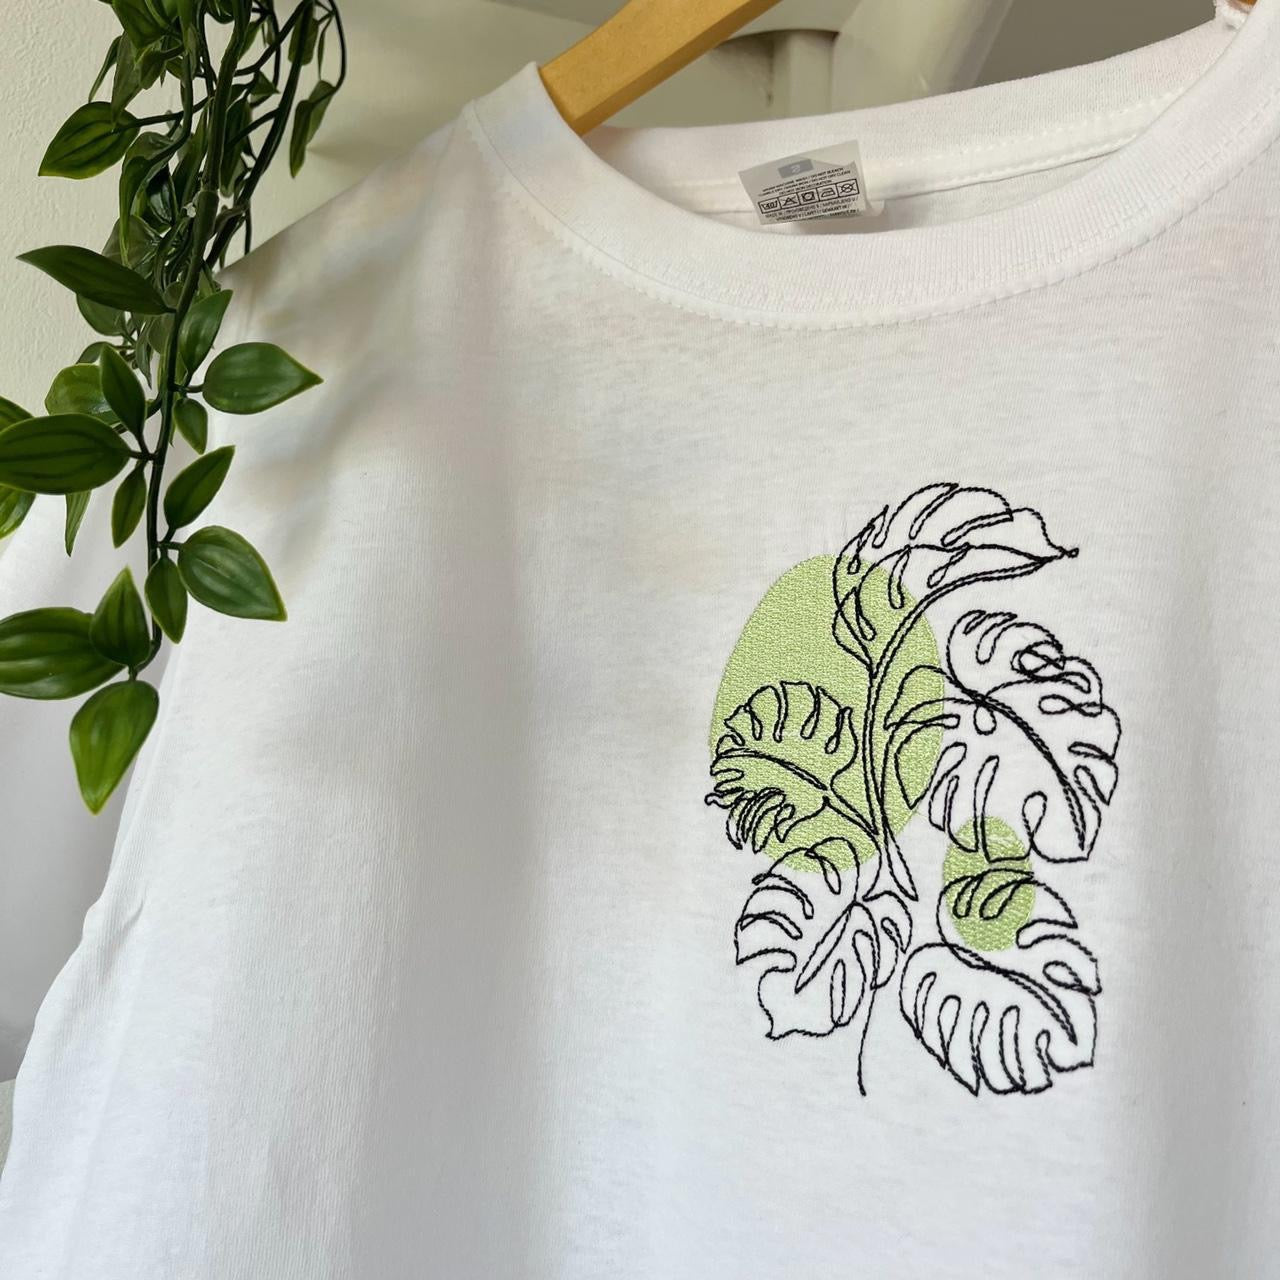 Monstera Plant Embroidered T-shirt